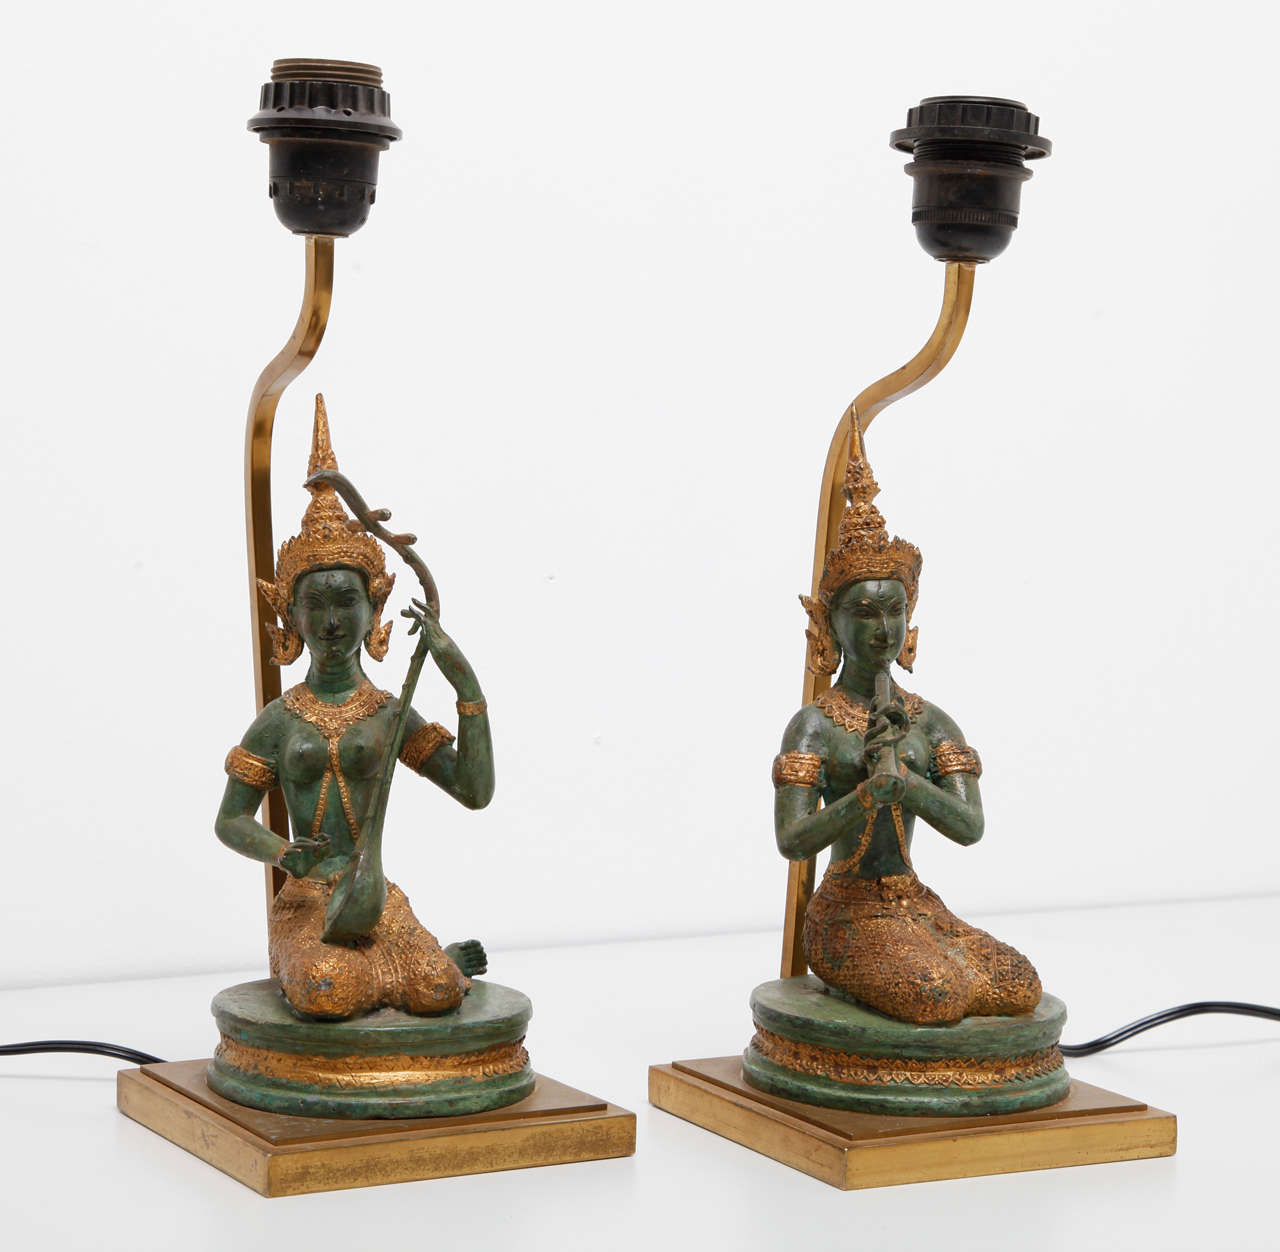 Modern bedside lamps bronze statues of Indian Hindu Goddesses playing music Table lamp, produced by J.L.B. decorative table lamps, 1970s.